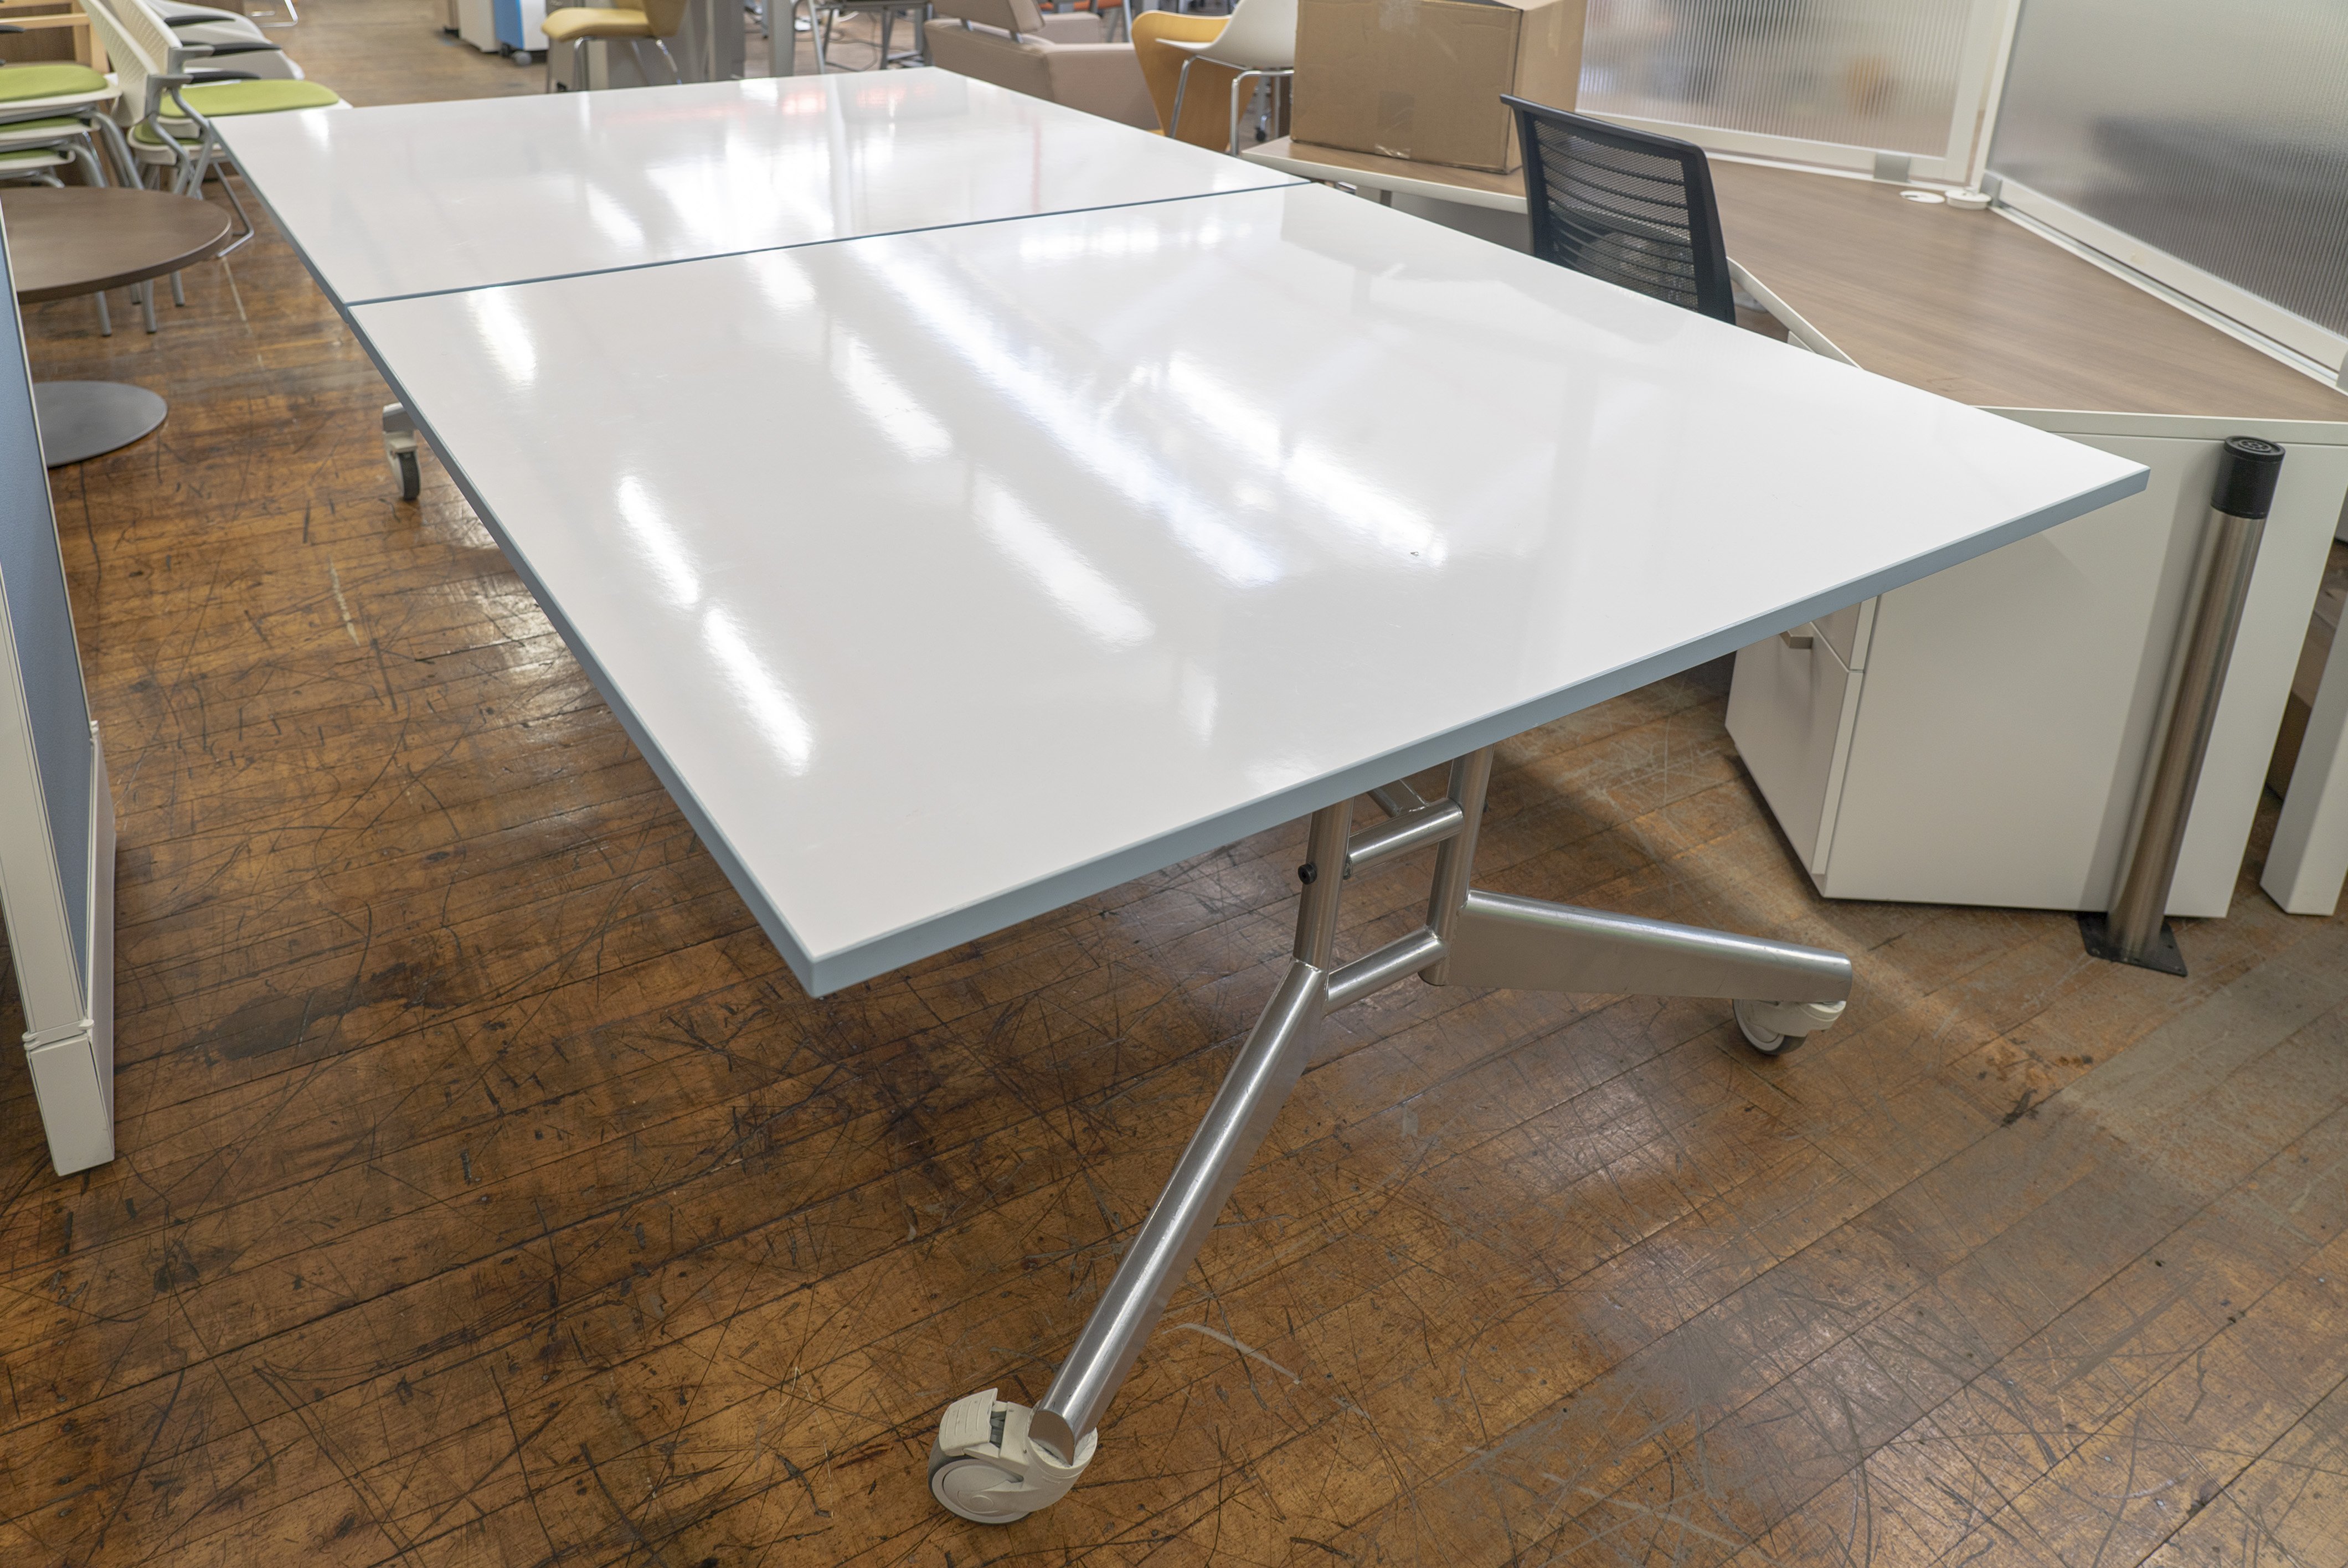 scale-11-nomad-folding-conference-table-with-mobile-whiteboard